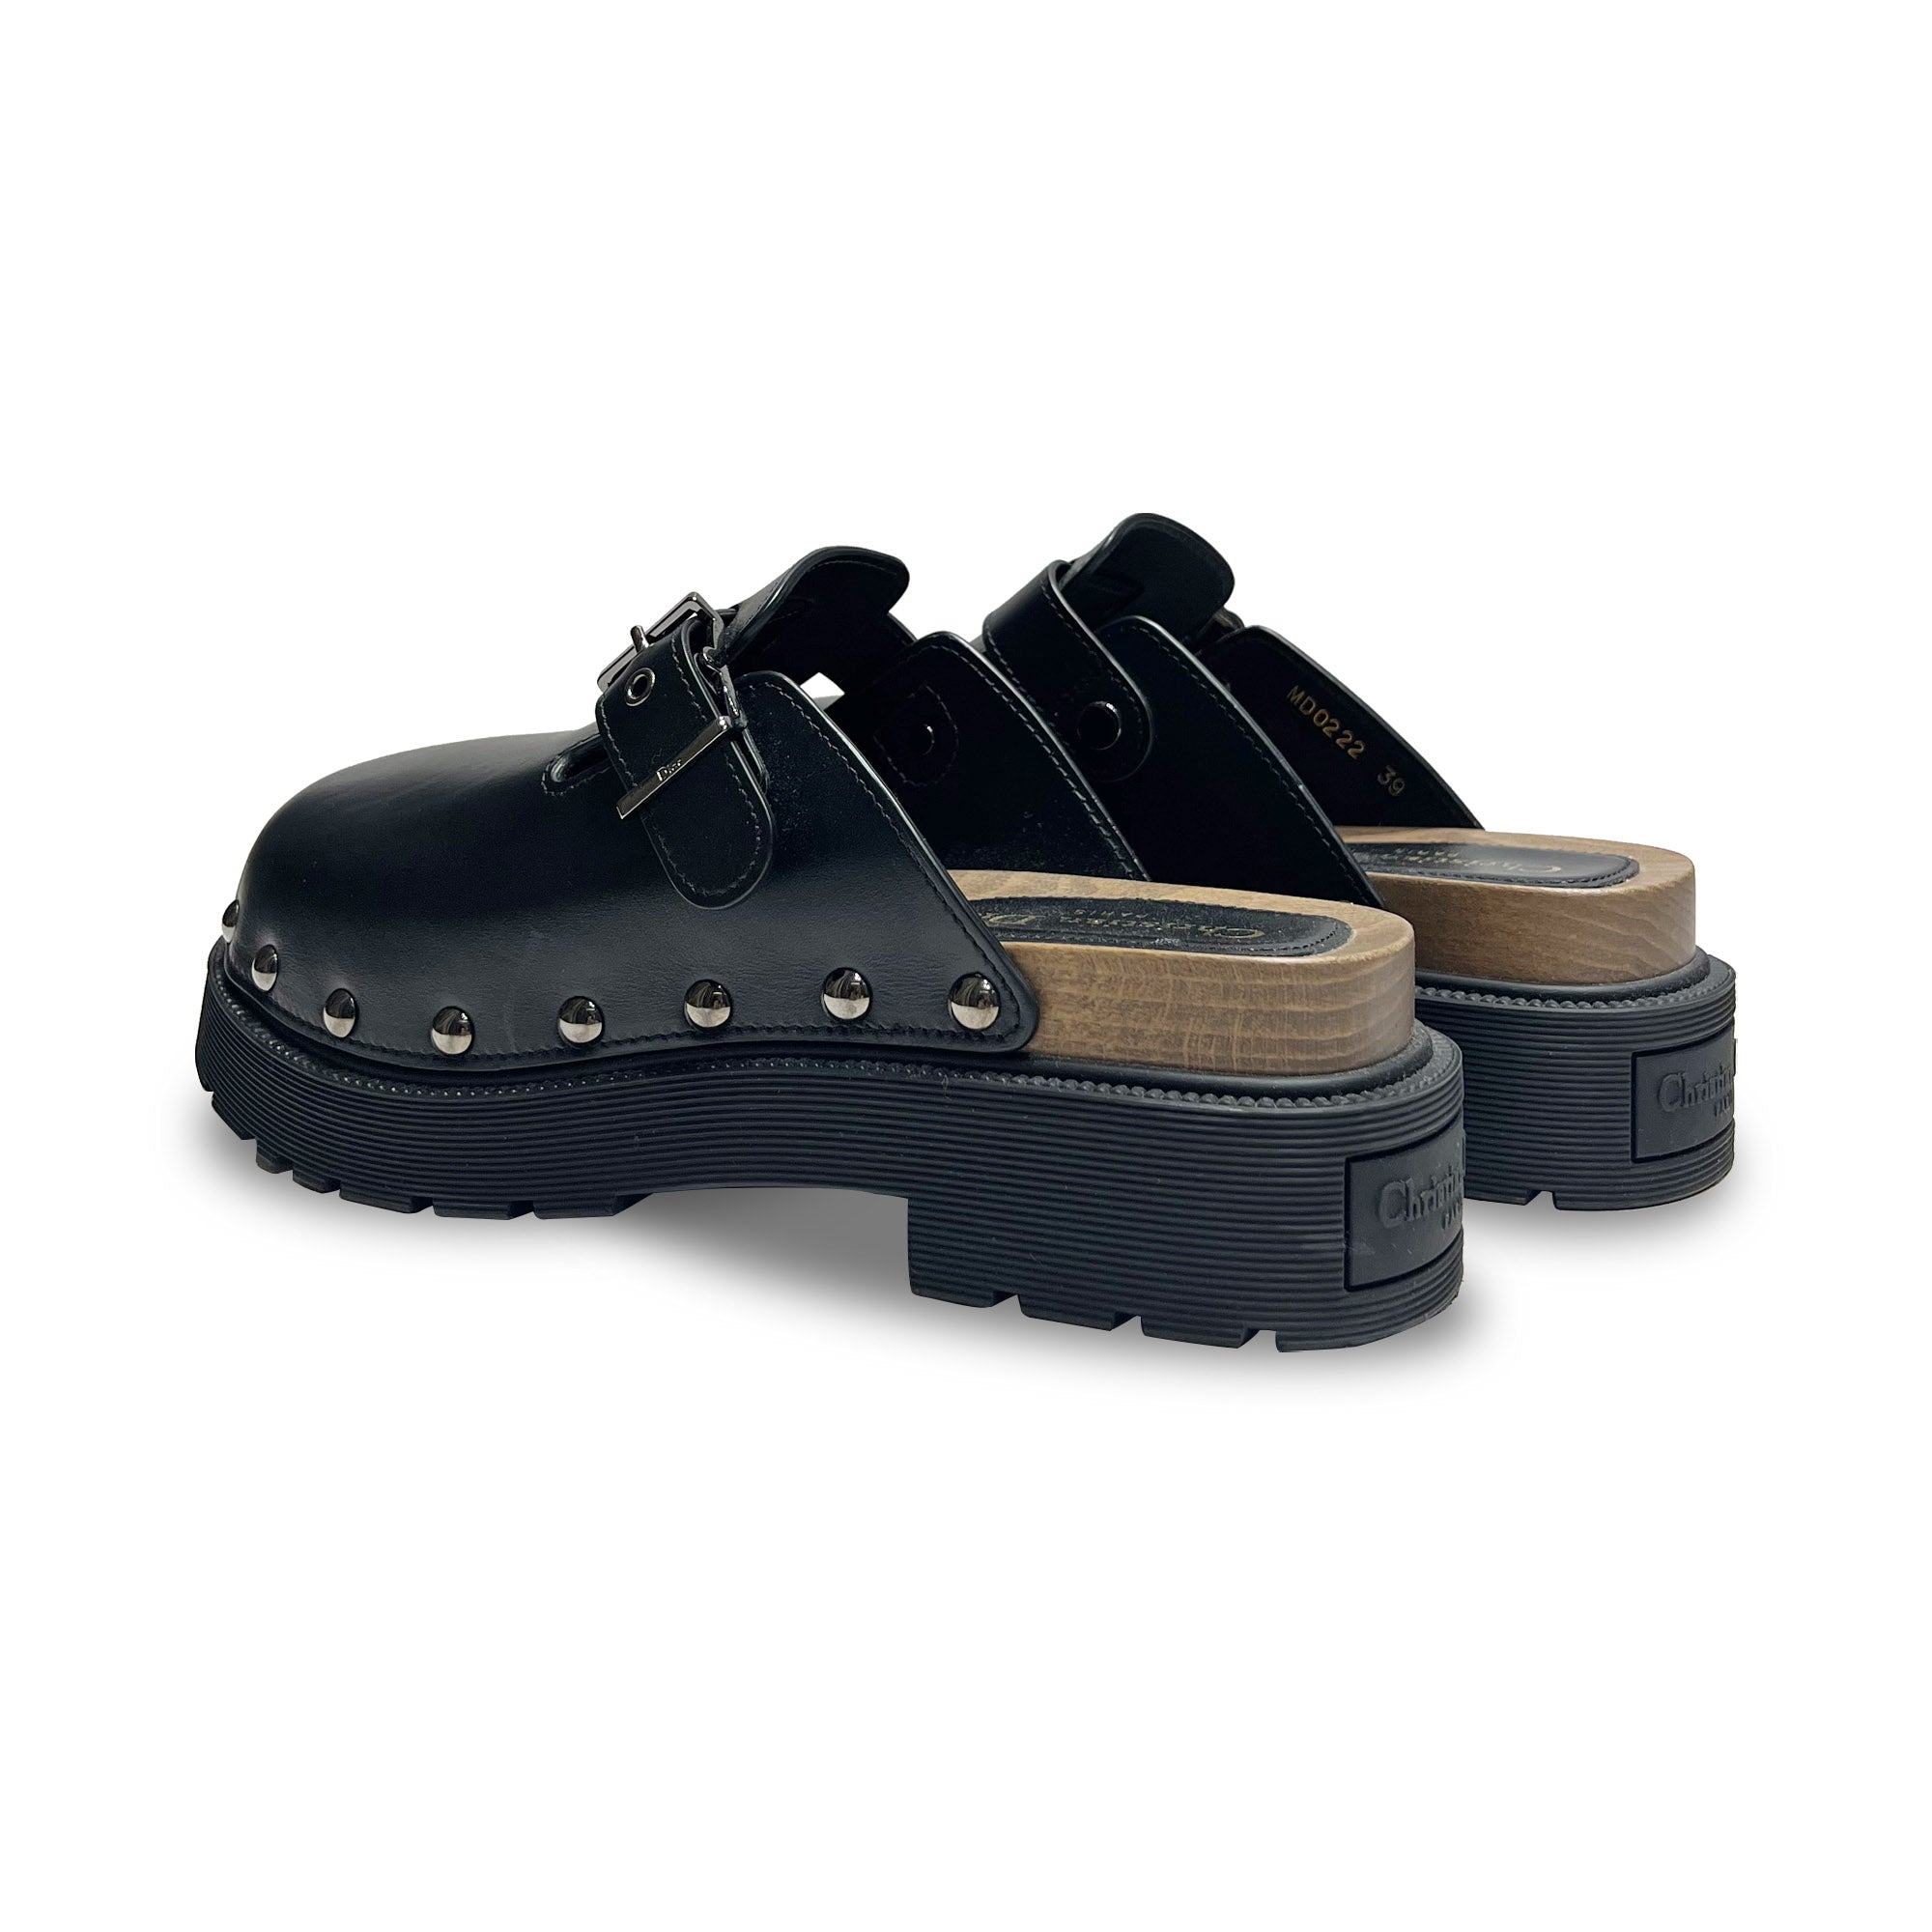 Christian Dior Black Leather Mules & Clogs